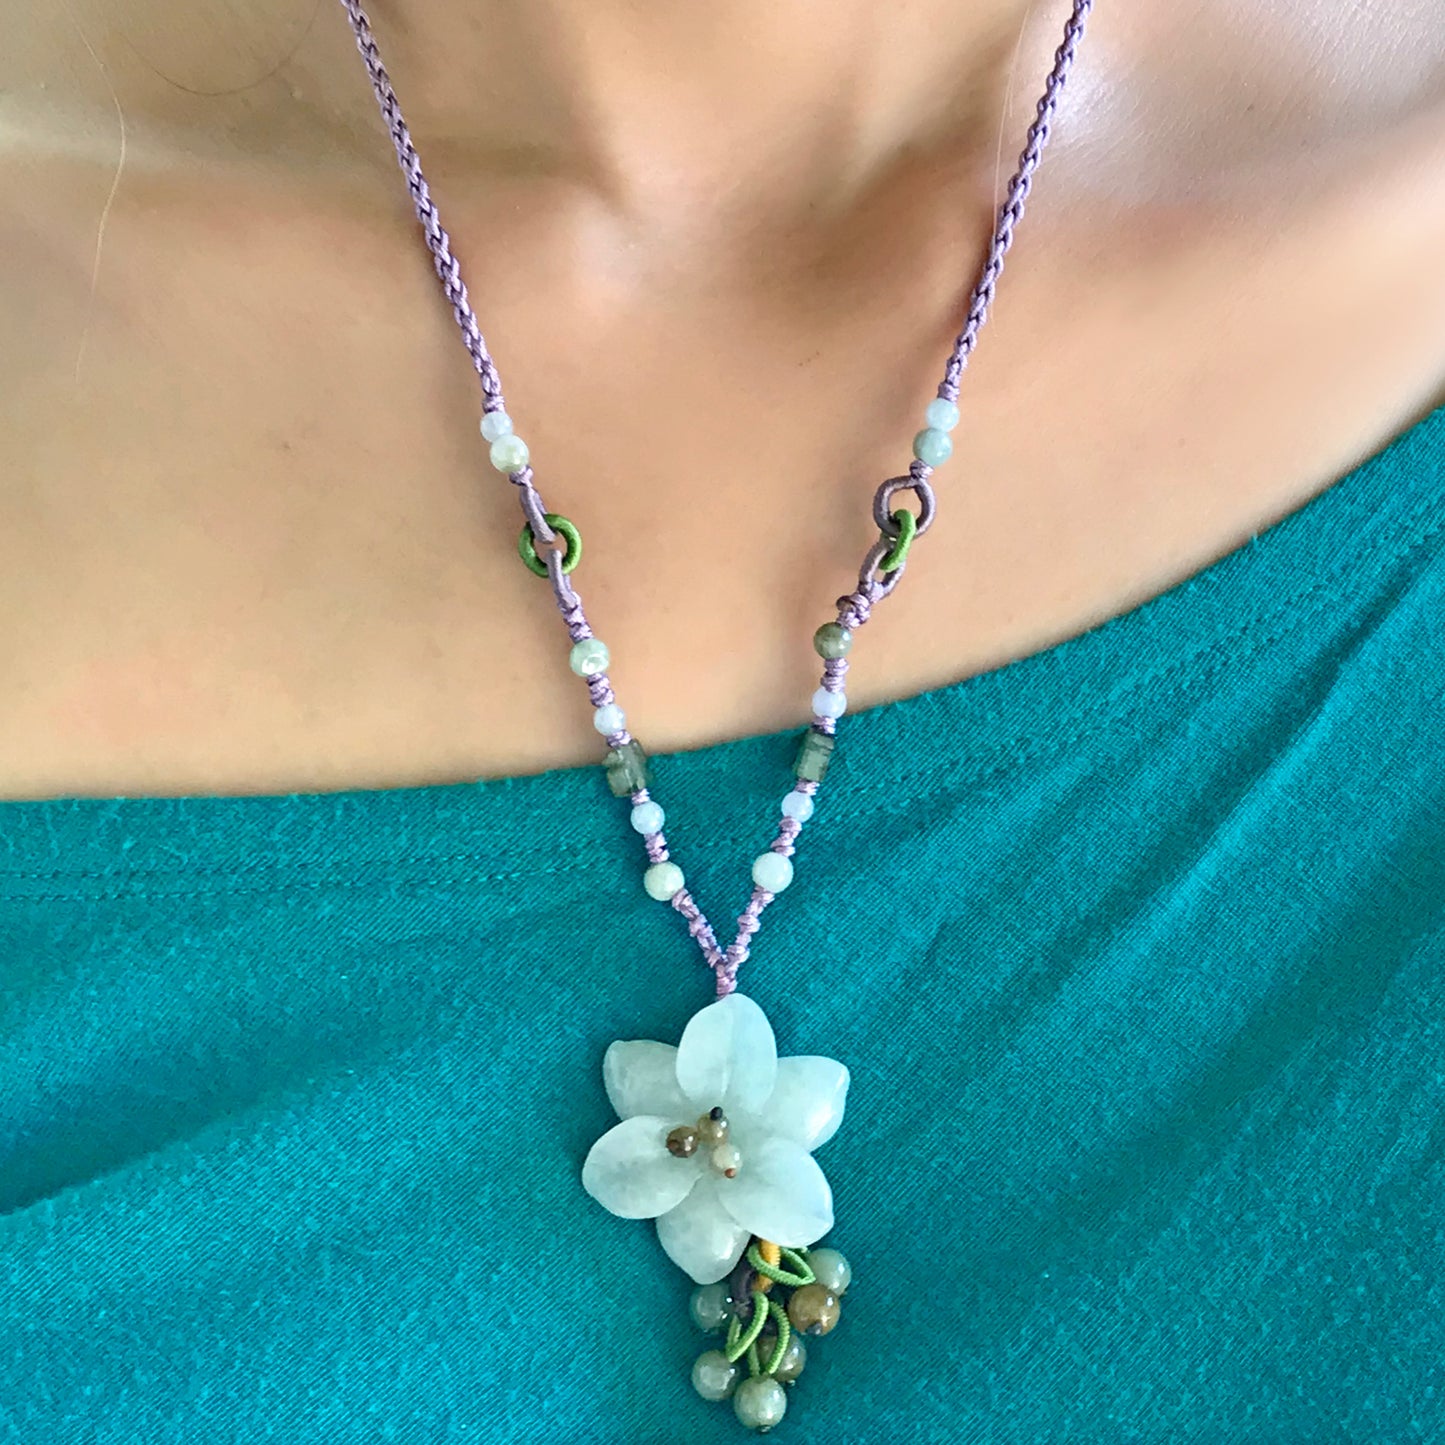 Experience Gracefulness with Pear Blossom Flower Honey Jade Necklace made with Lavender Cord